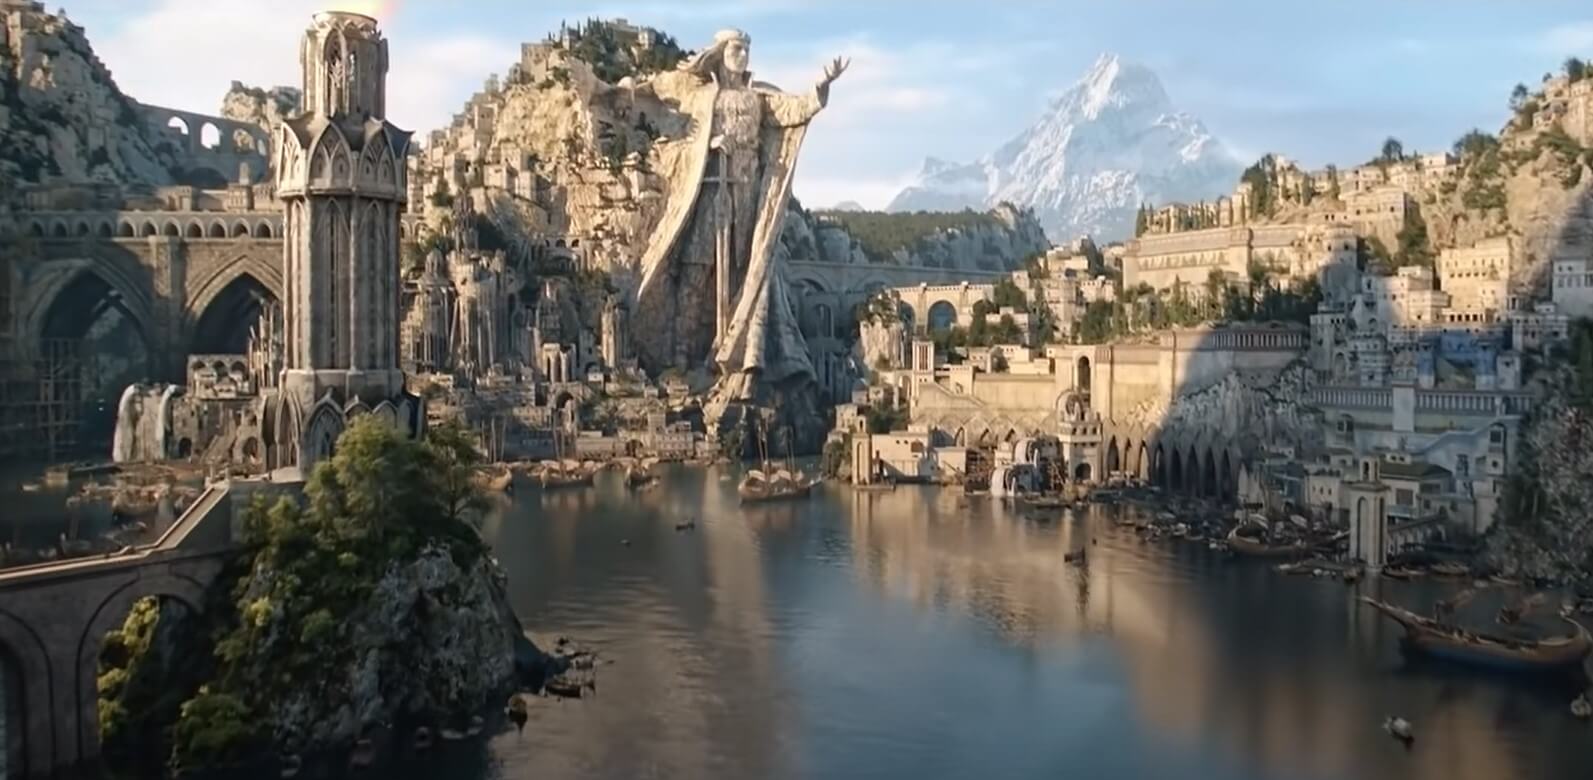 First trailer for the new “Lord of the Rings” series released